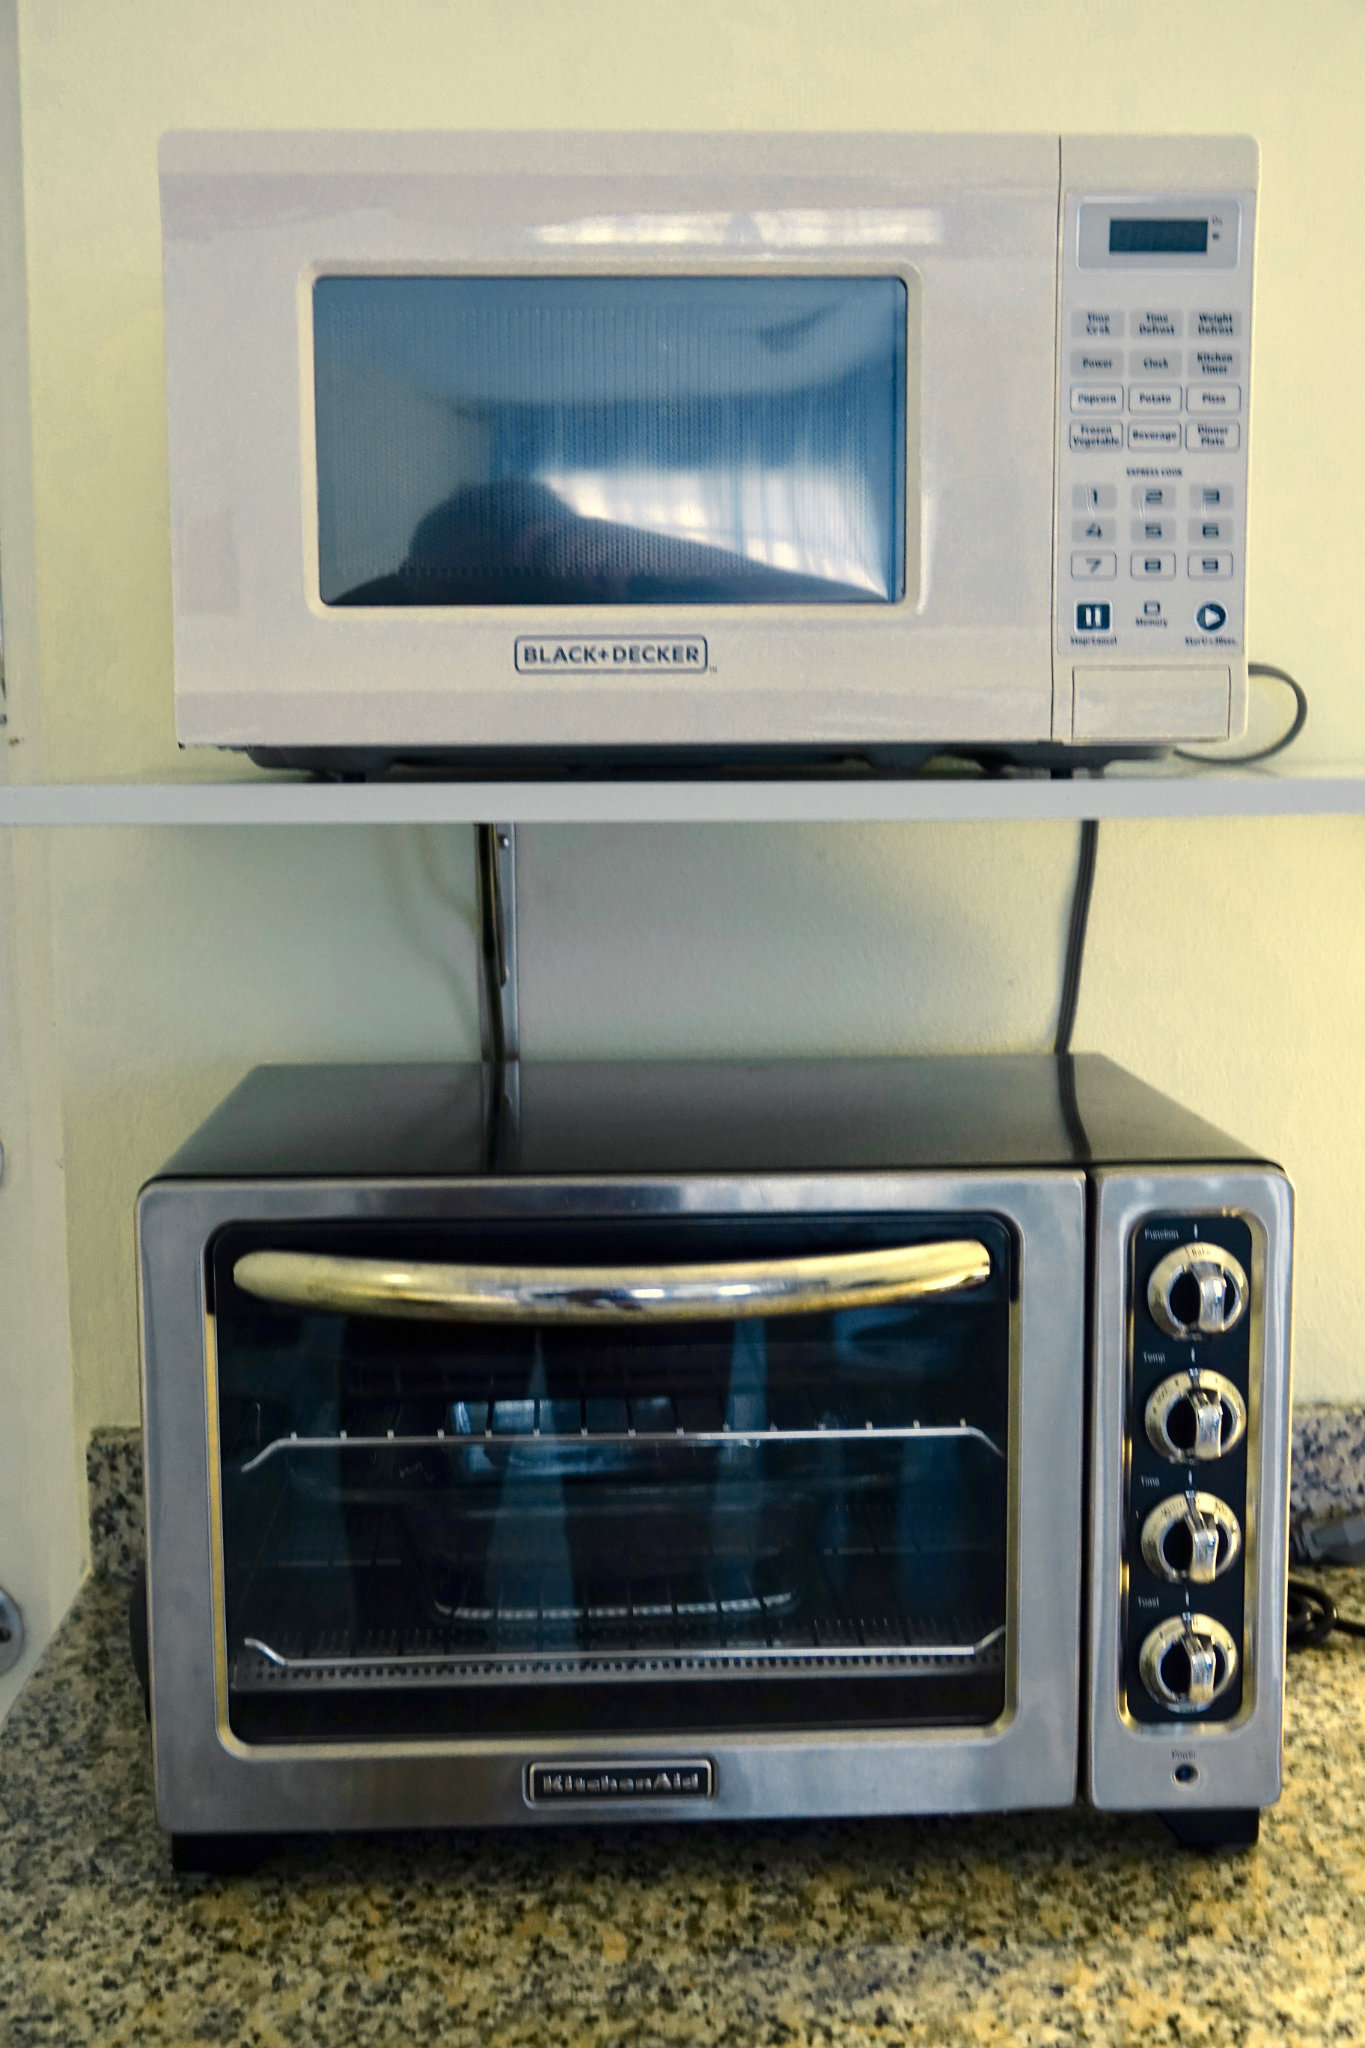 Mirowave and oven/toaster